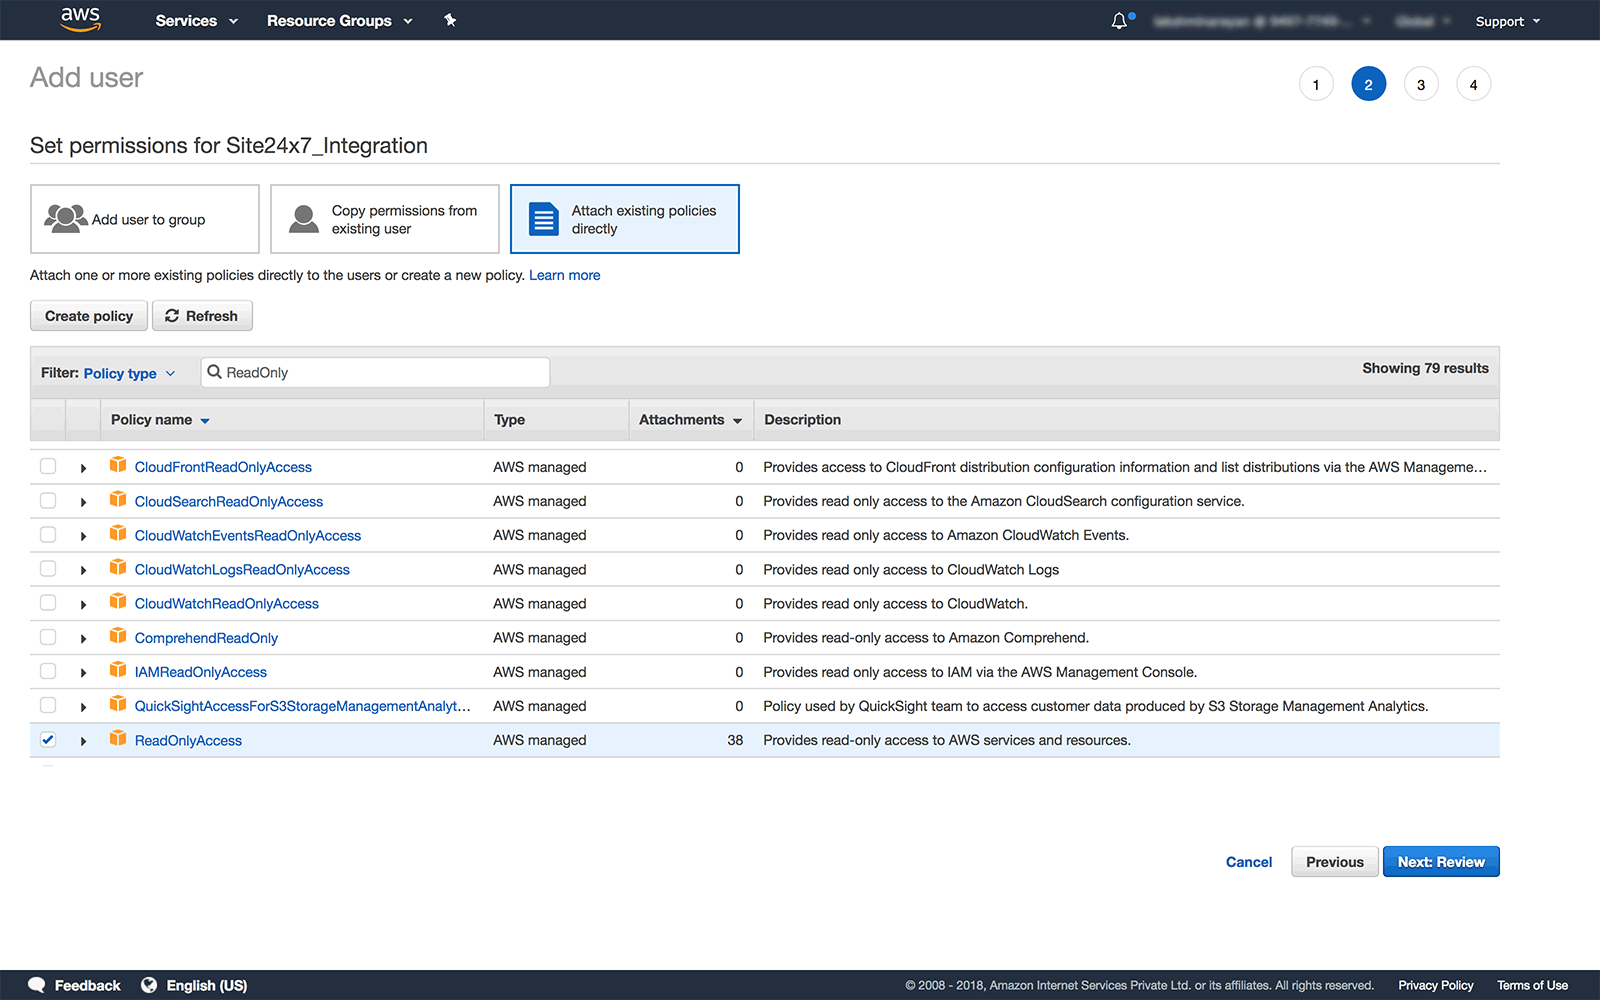 Provide ReadonlyAccess to all supported AWS services and resources